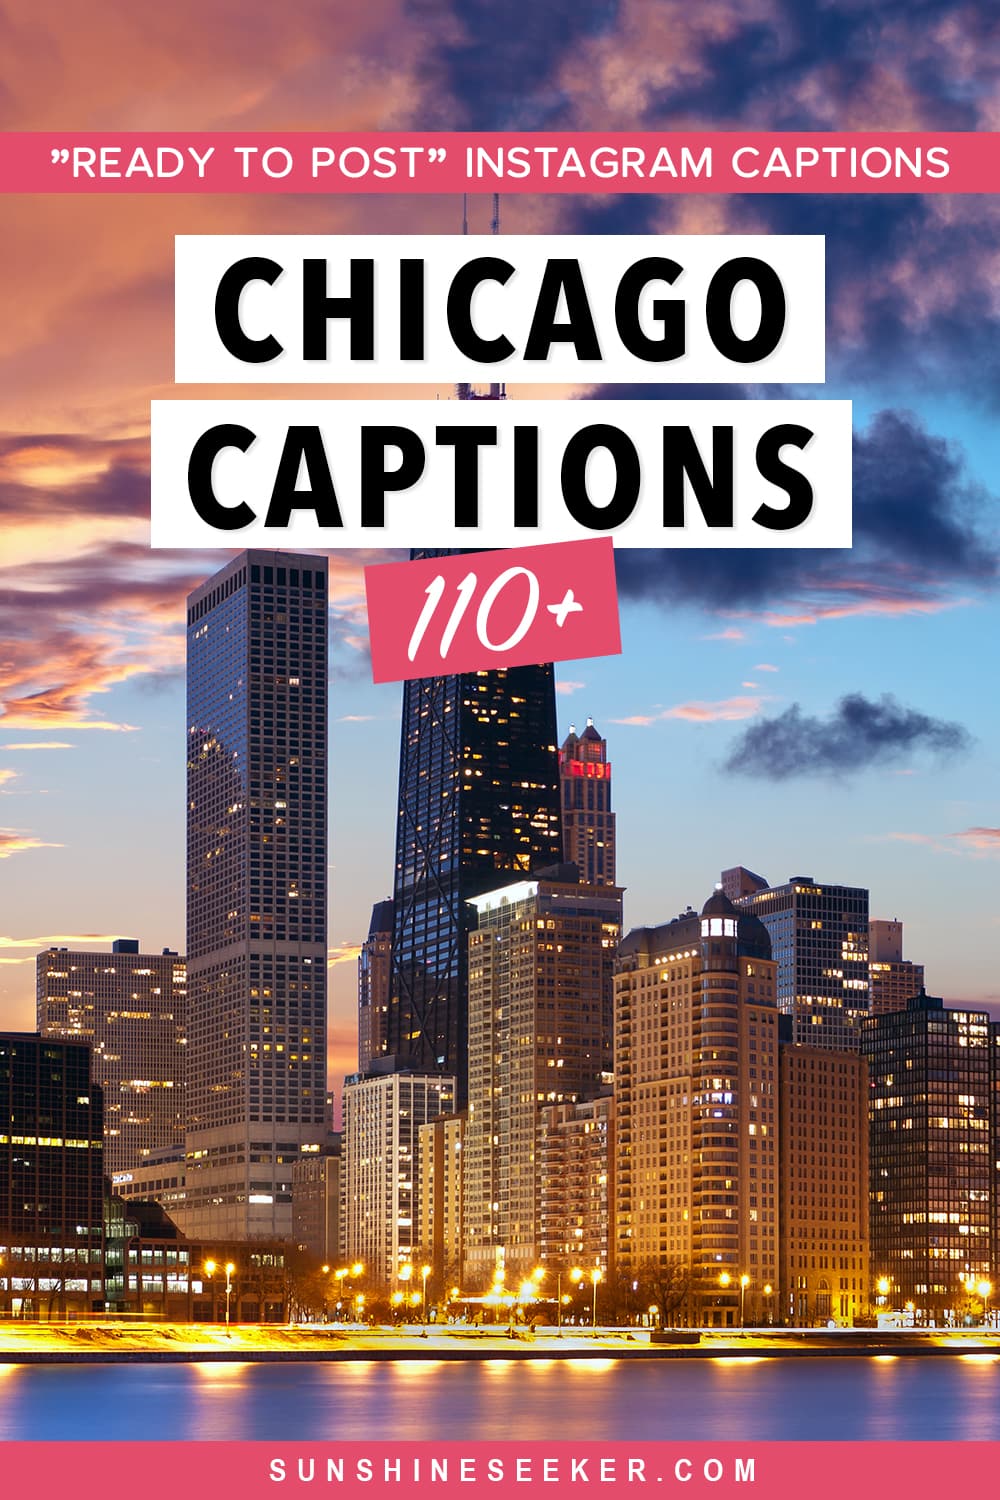 110+ Chicago Instagram captions to spice up your next social media post. Here you'll find "ready to post" Chicago Instagram captions, funny Chicago Instagram captions and quotes about Chicago by famous people.